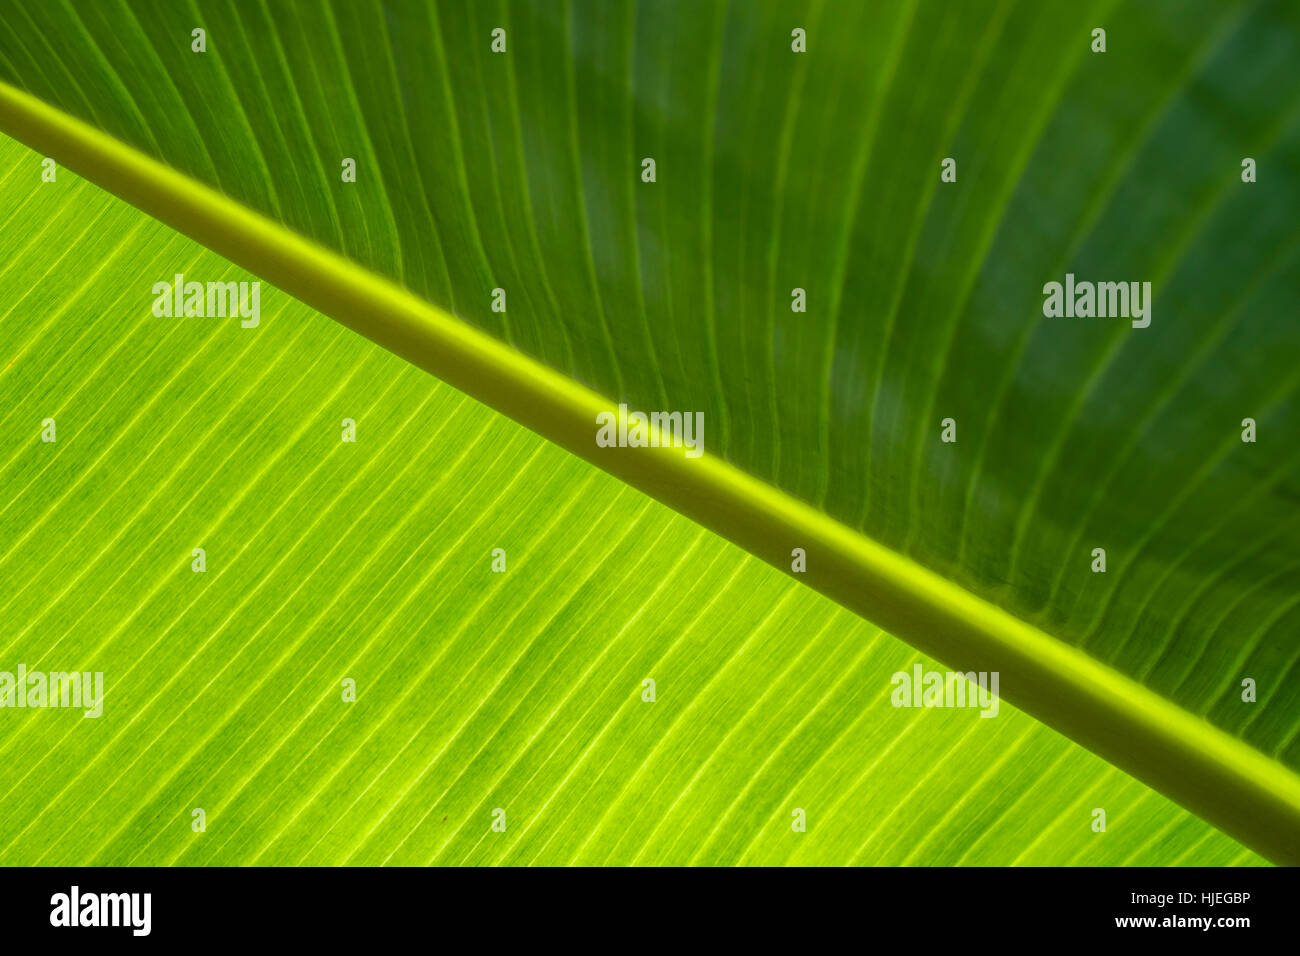 A close up of banana leaf texture Stock Photo